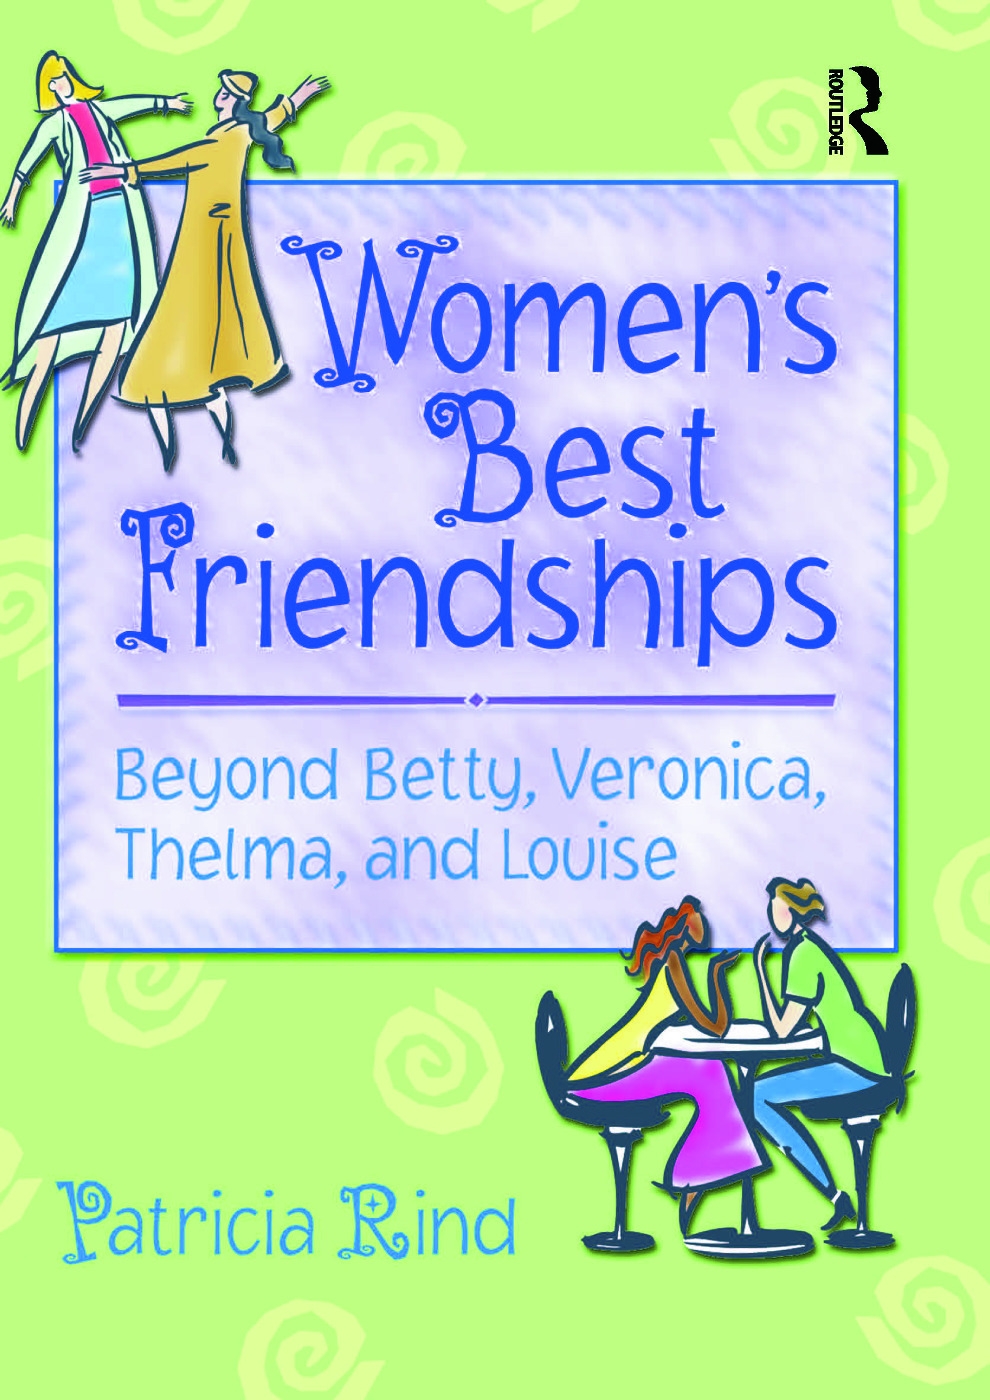 Women’s Best Friendships: Beyond Betty, Veronica, Thelma, and Louise